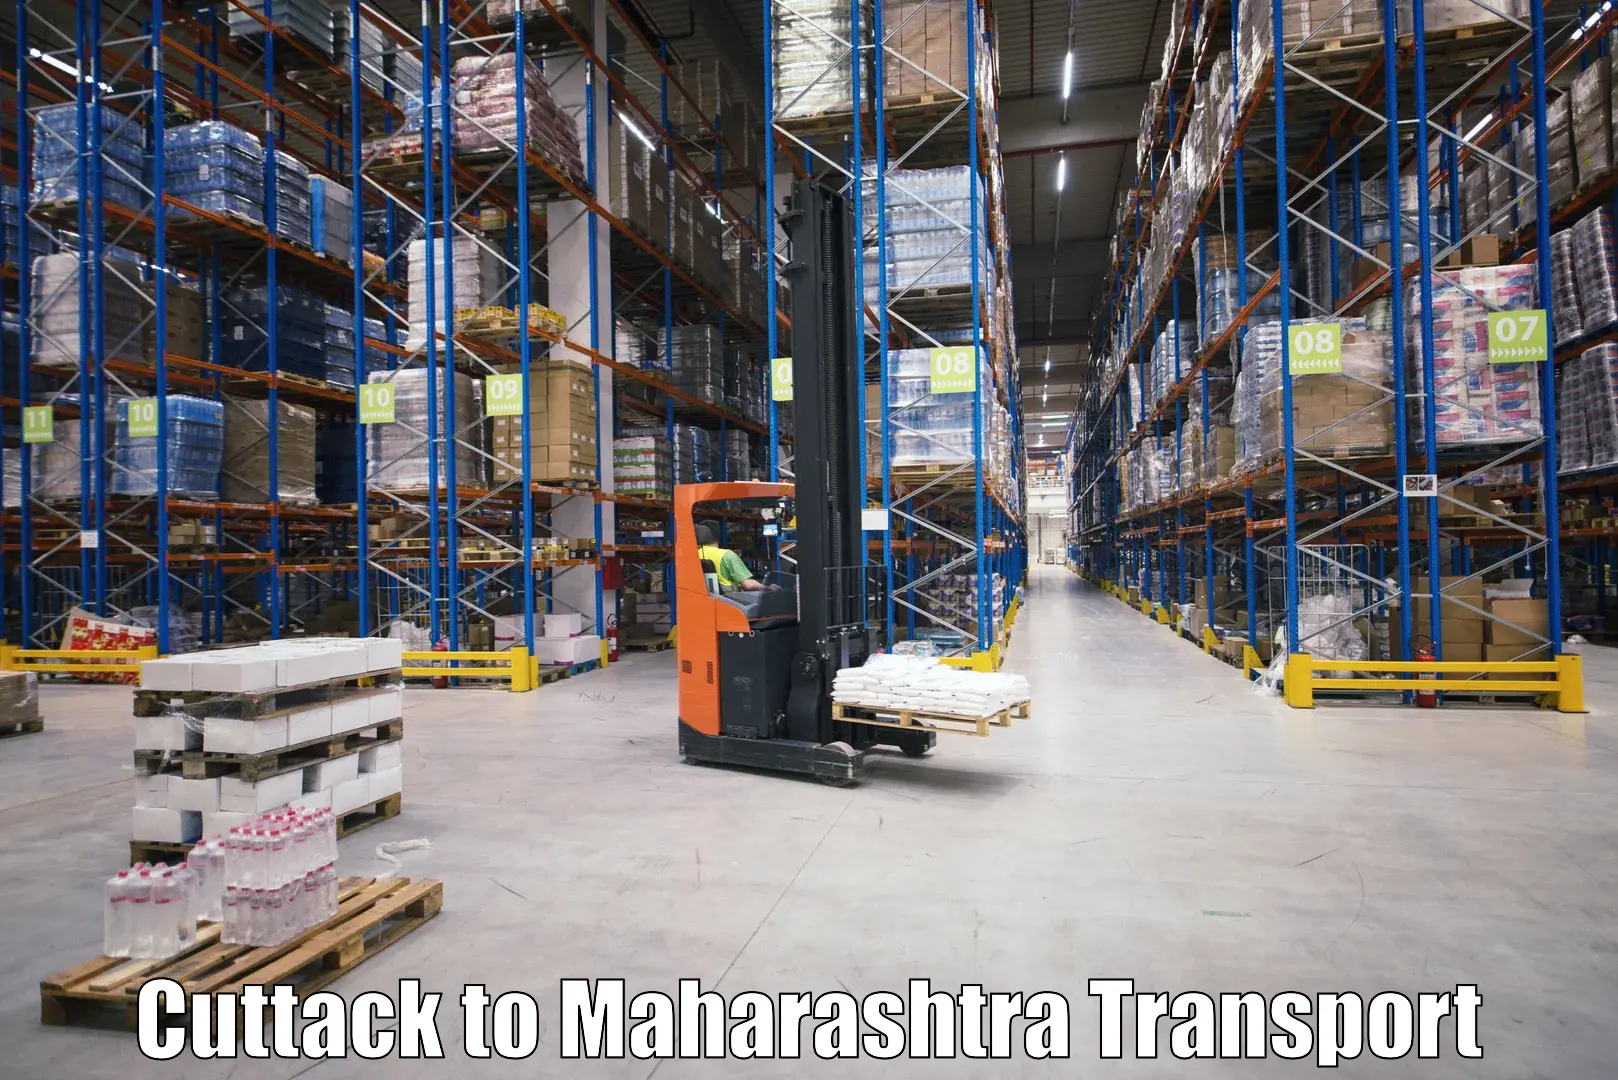 Road transport online services Cuttack to Andheri